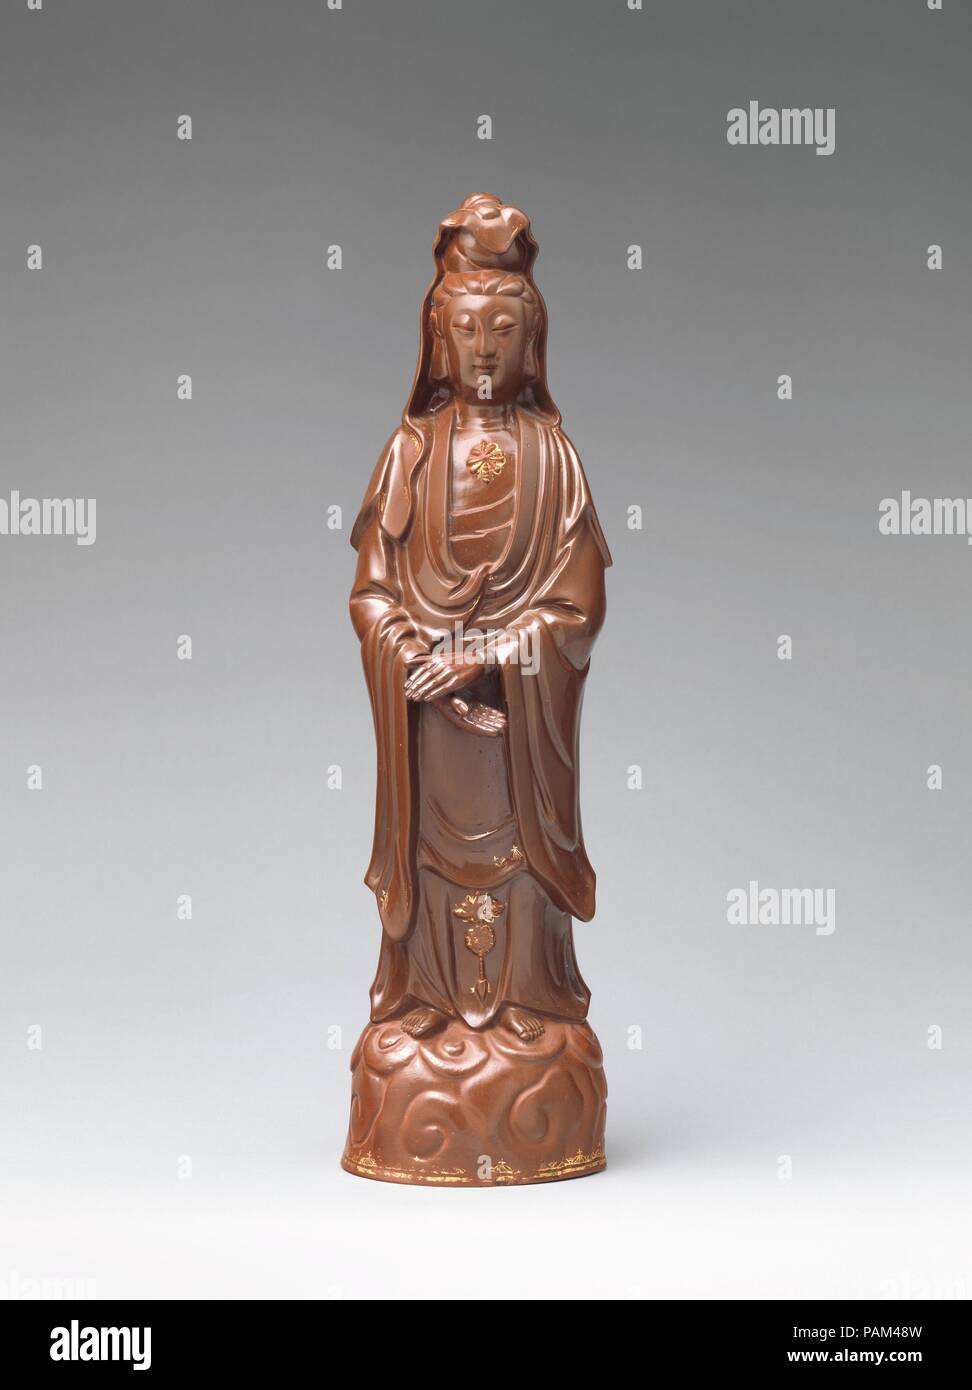 Kuan Yin. Culture: German, Meissen. Dimensions: Overall (confirmed): 14 3/4 × 4 × 4 1/8 in. (37.5 × 10.2 × 10.5 cm). Factory: Meissen Manufactory (German, 1710-present). Factory director: Böttger Period (1713-1720). Date: ca. 1711.  Copied, and possibly cast, from a model in Chinese blanc de chine porcelain, ca. 1700. Museum: Metropolitan Museum of Art, New York, USA. Stock Photo